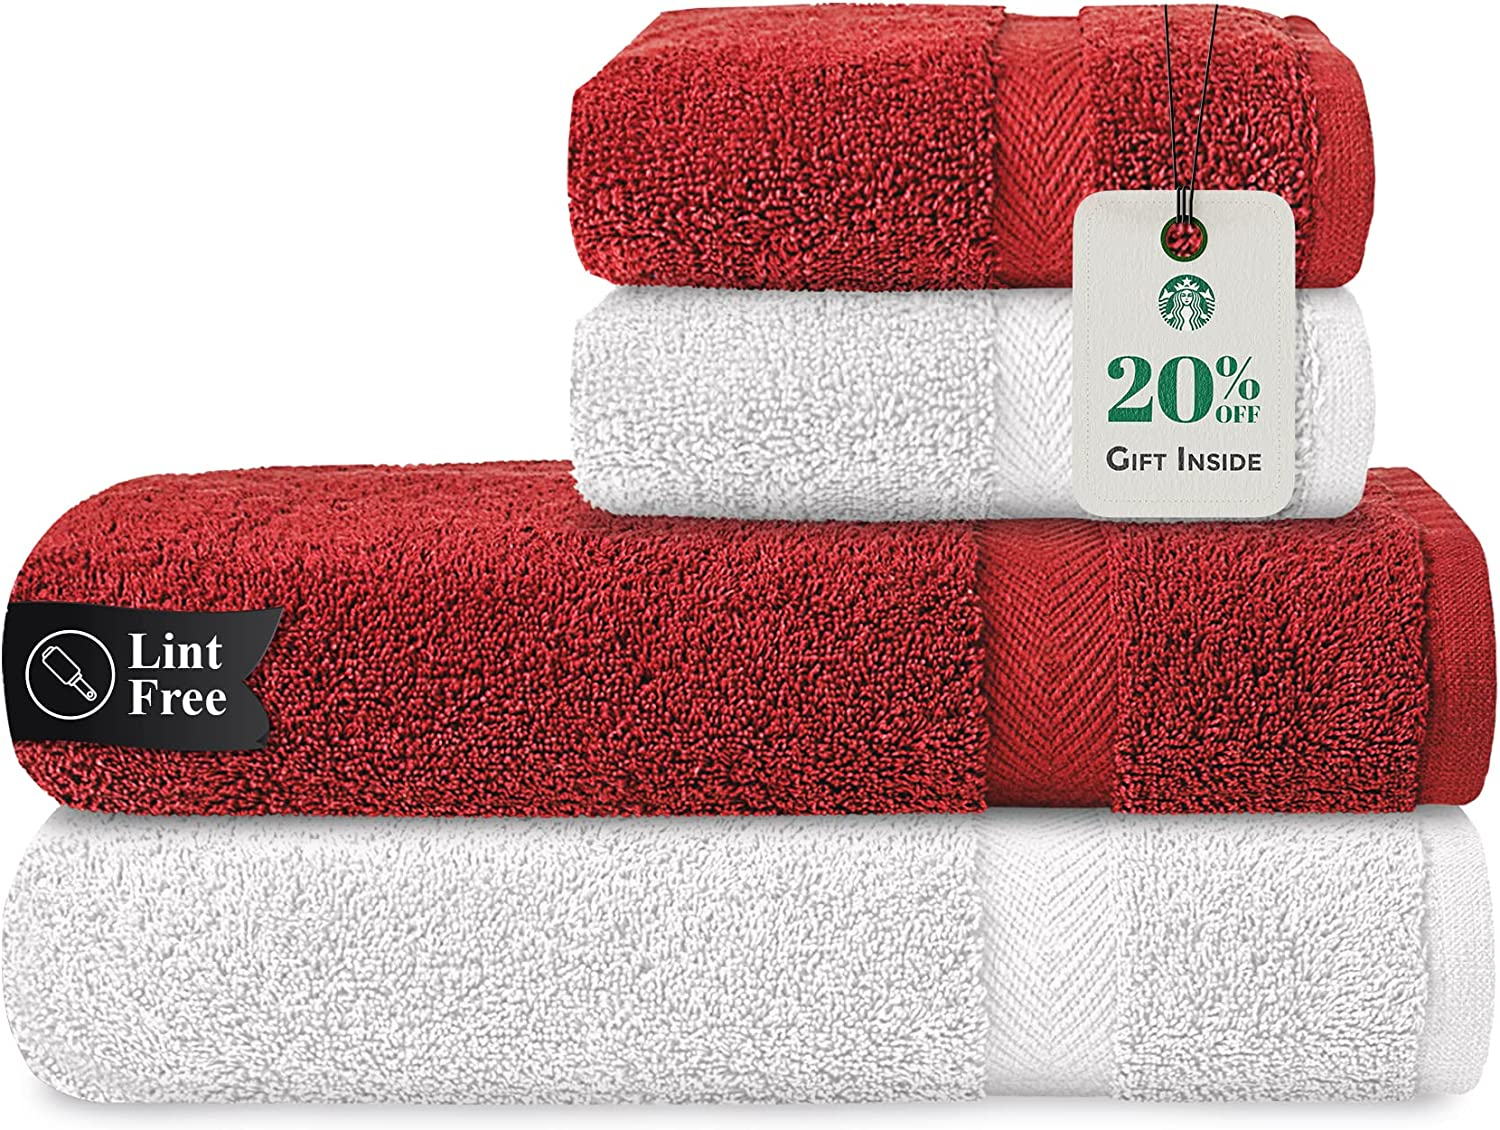 Stony Edge Towel Set, 1 Bath Towel, 1 Hand Towel & 2 Face Towels, 100% Cotton, 600 GSM, Soft & Absorbent for Bathroom, Kitchen, Gym & Spa, Gray